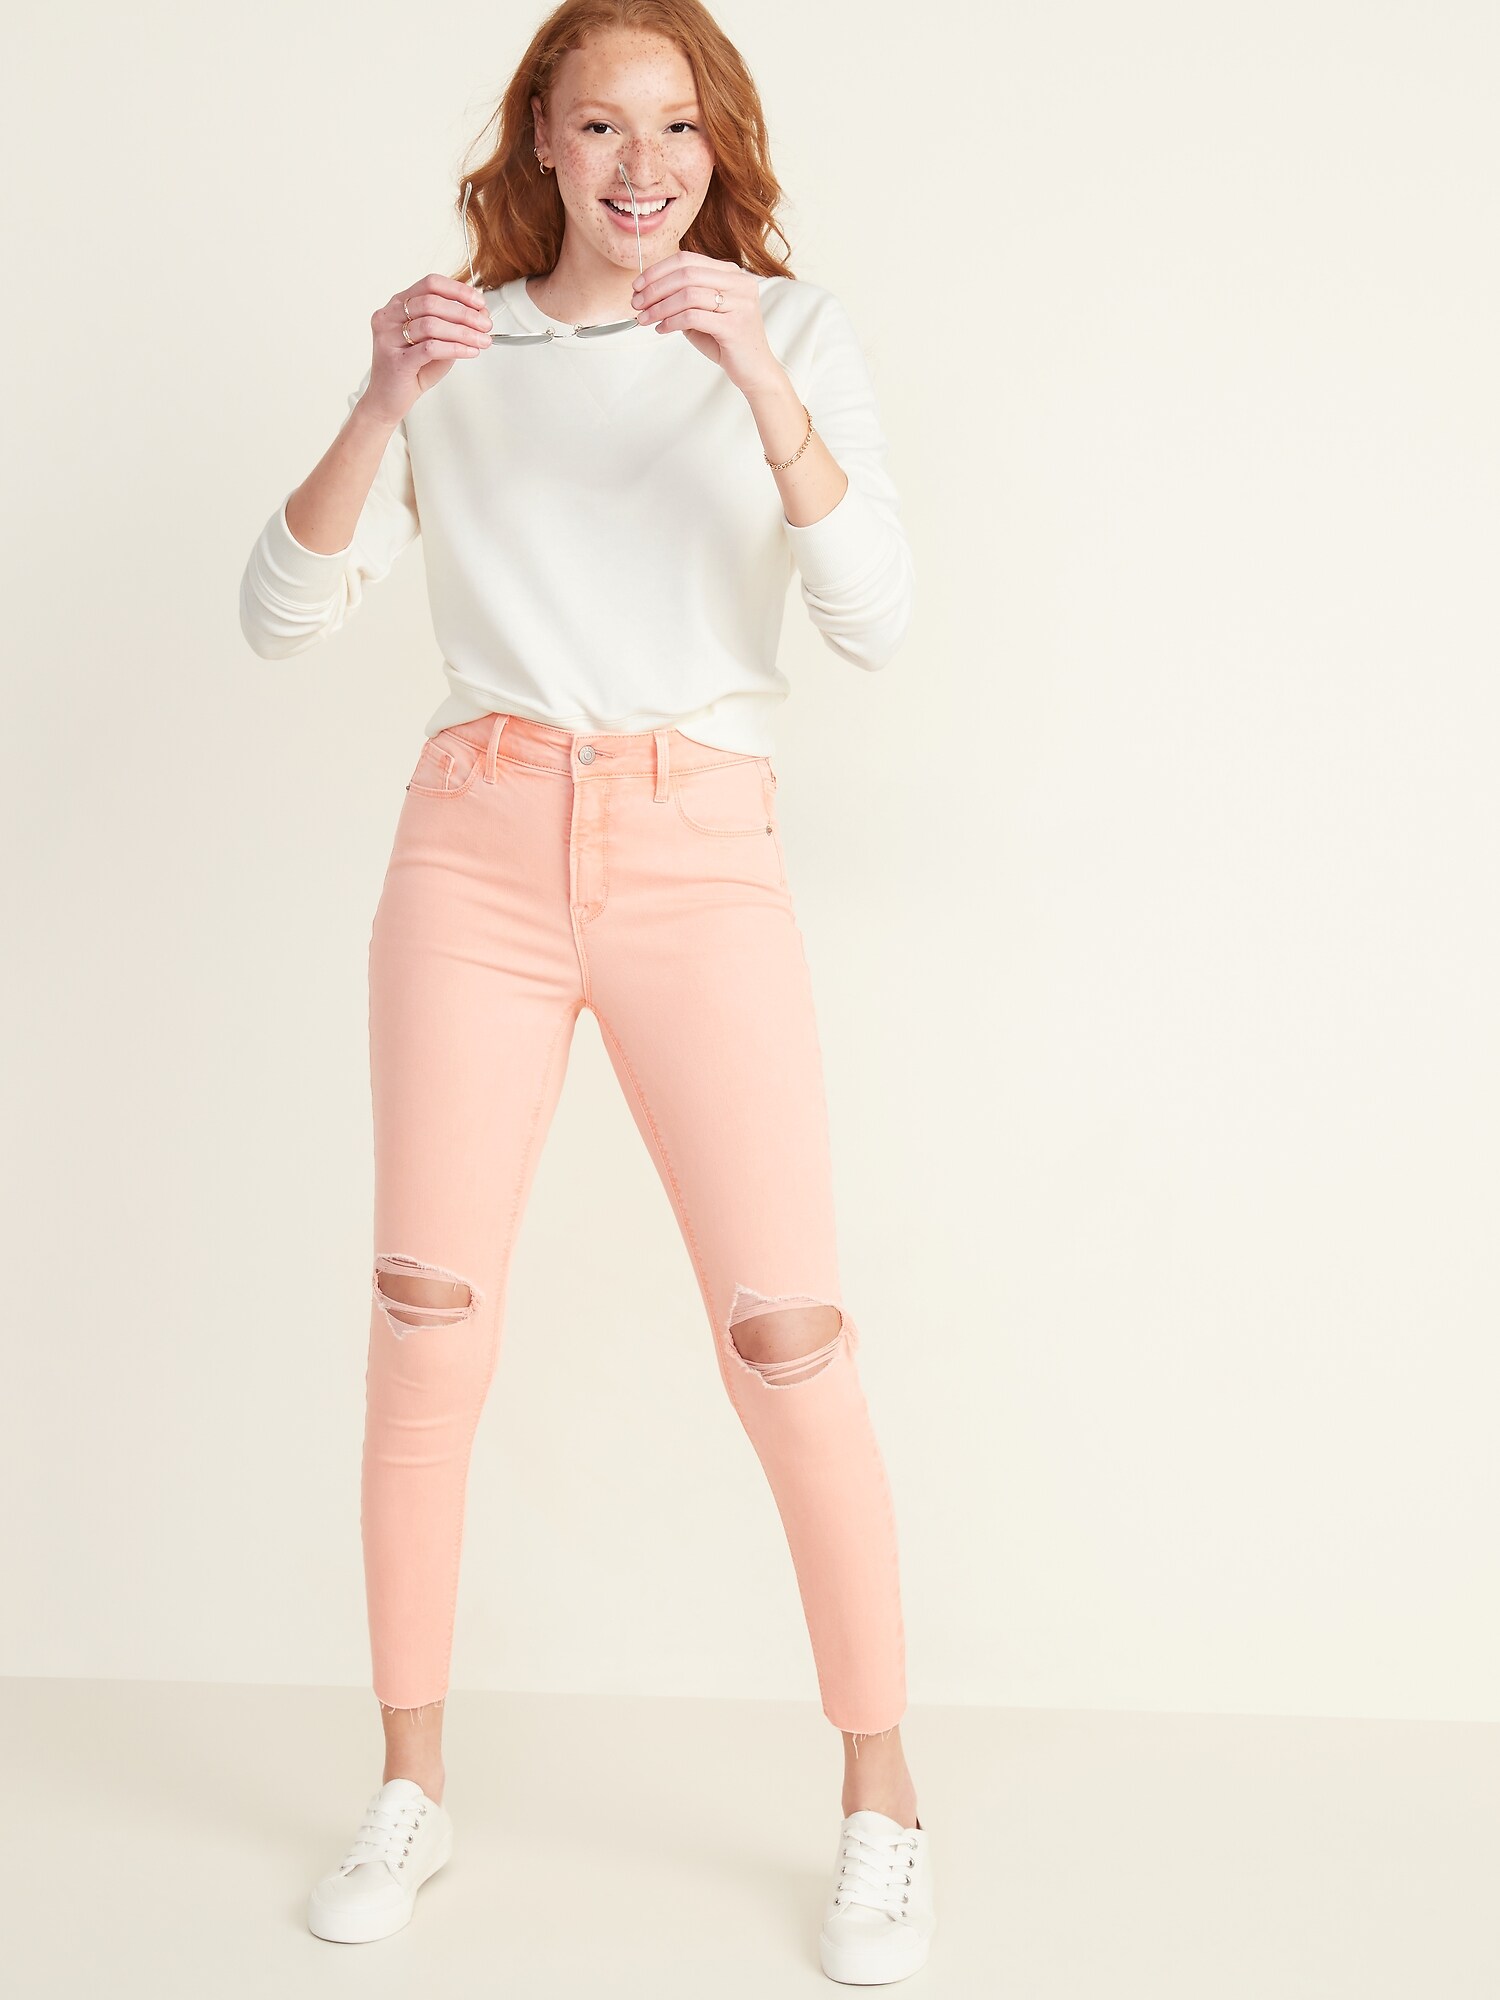 old navy pink jeans